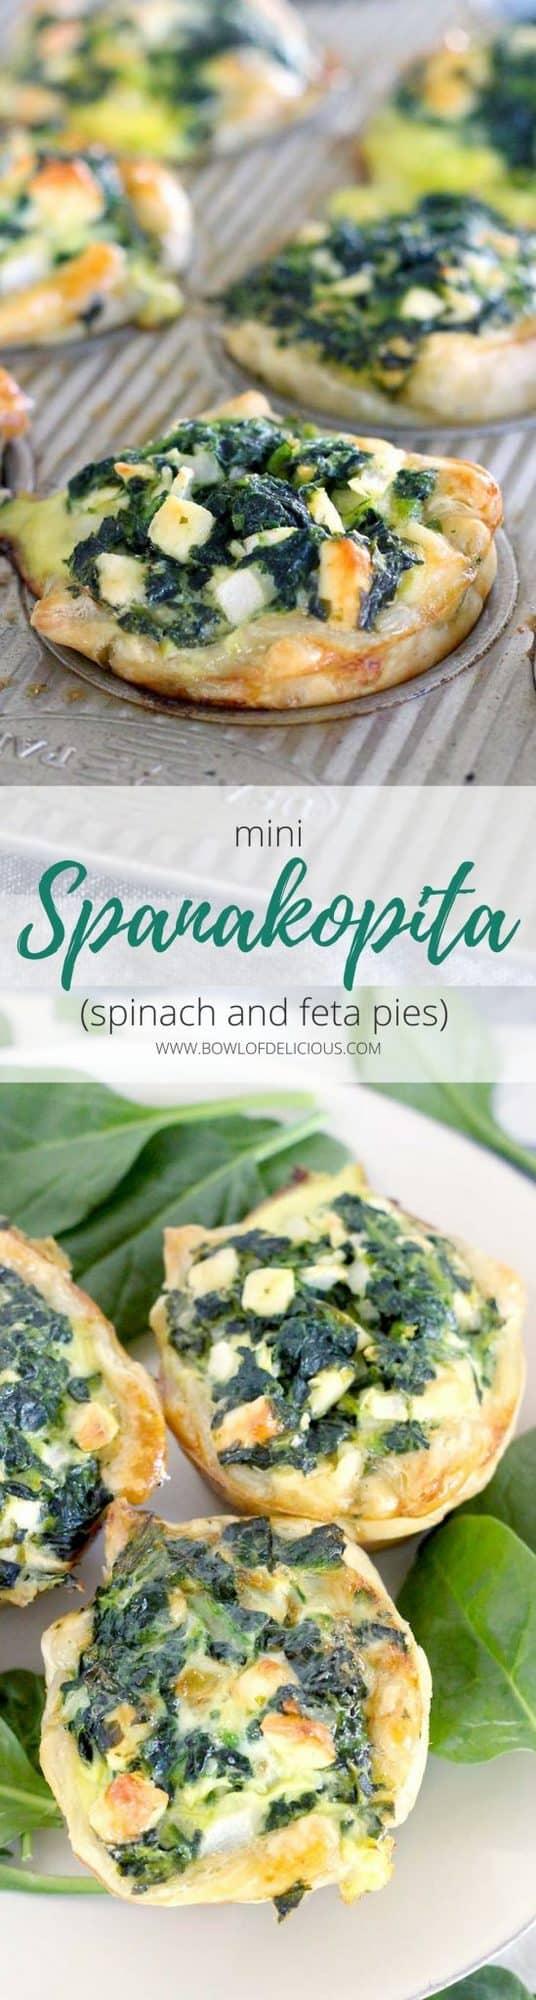 These Mini Spinach Feta pies are an easy alternative to traditional Greek Spanakopita, with only 5 ingredients and 10 minutes of hands on time! These are packed FULL of healthy spinach, and a perfect vegetarian entree or appetizer. #Spanakopita #SpinachPie #GreekFood #MediterraneanFood #Appetizer #PuffPastry #Vegetarian